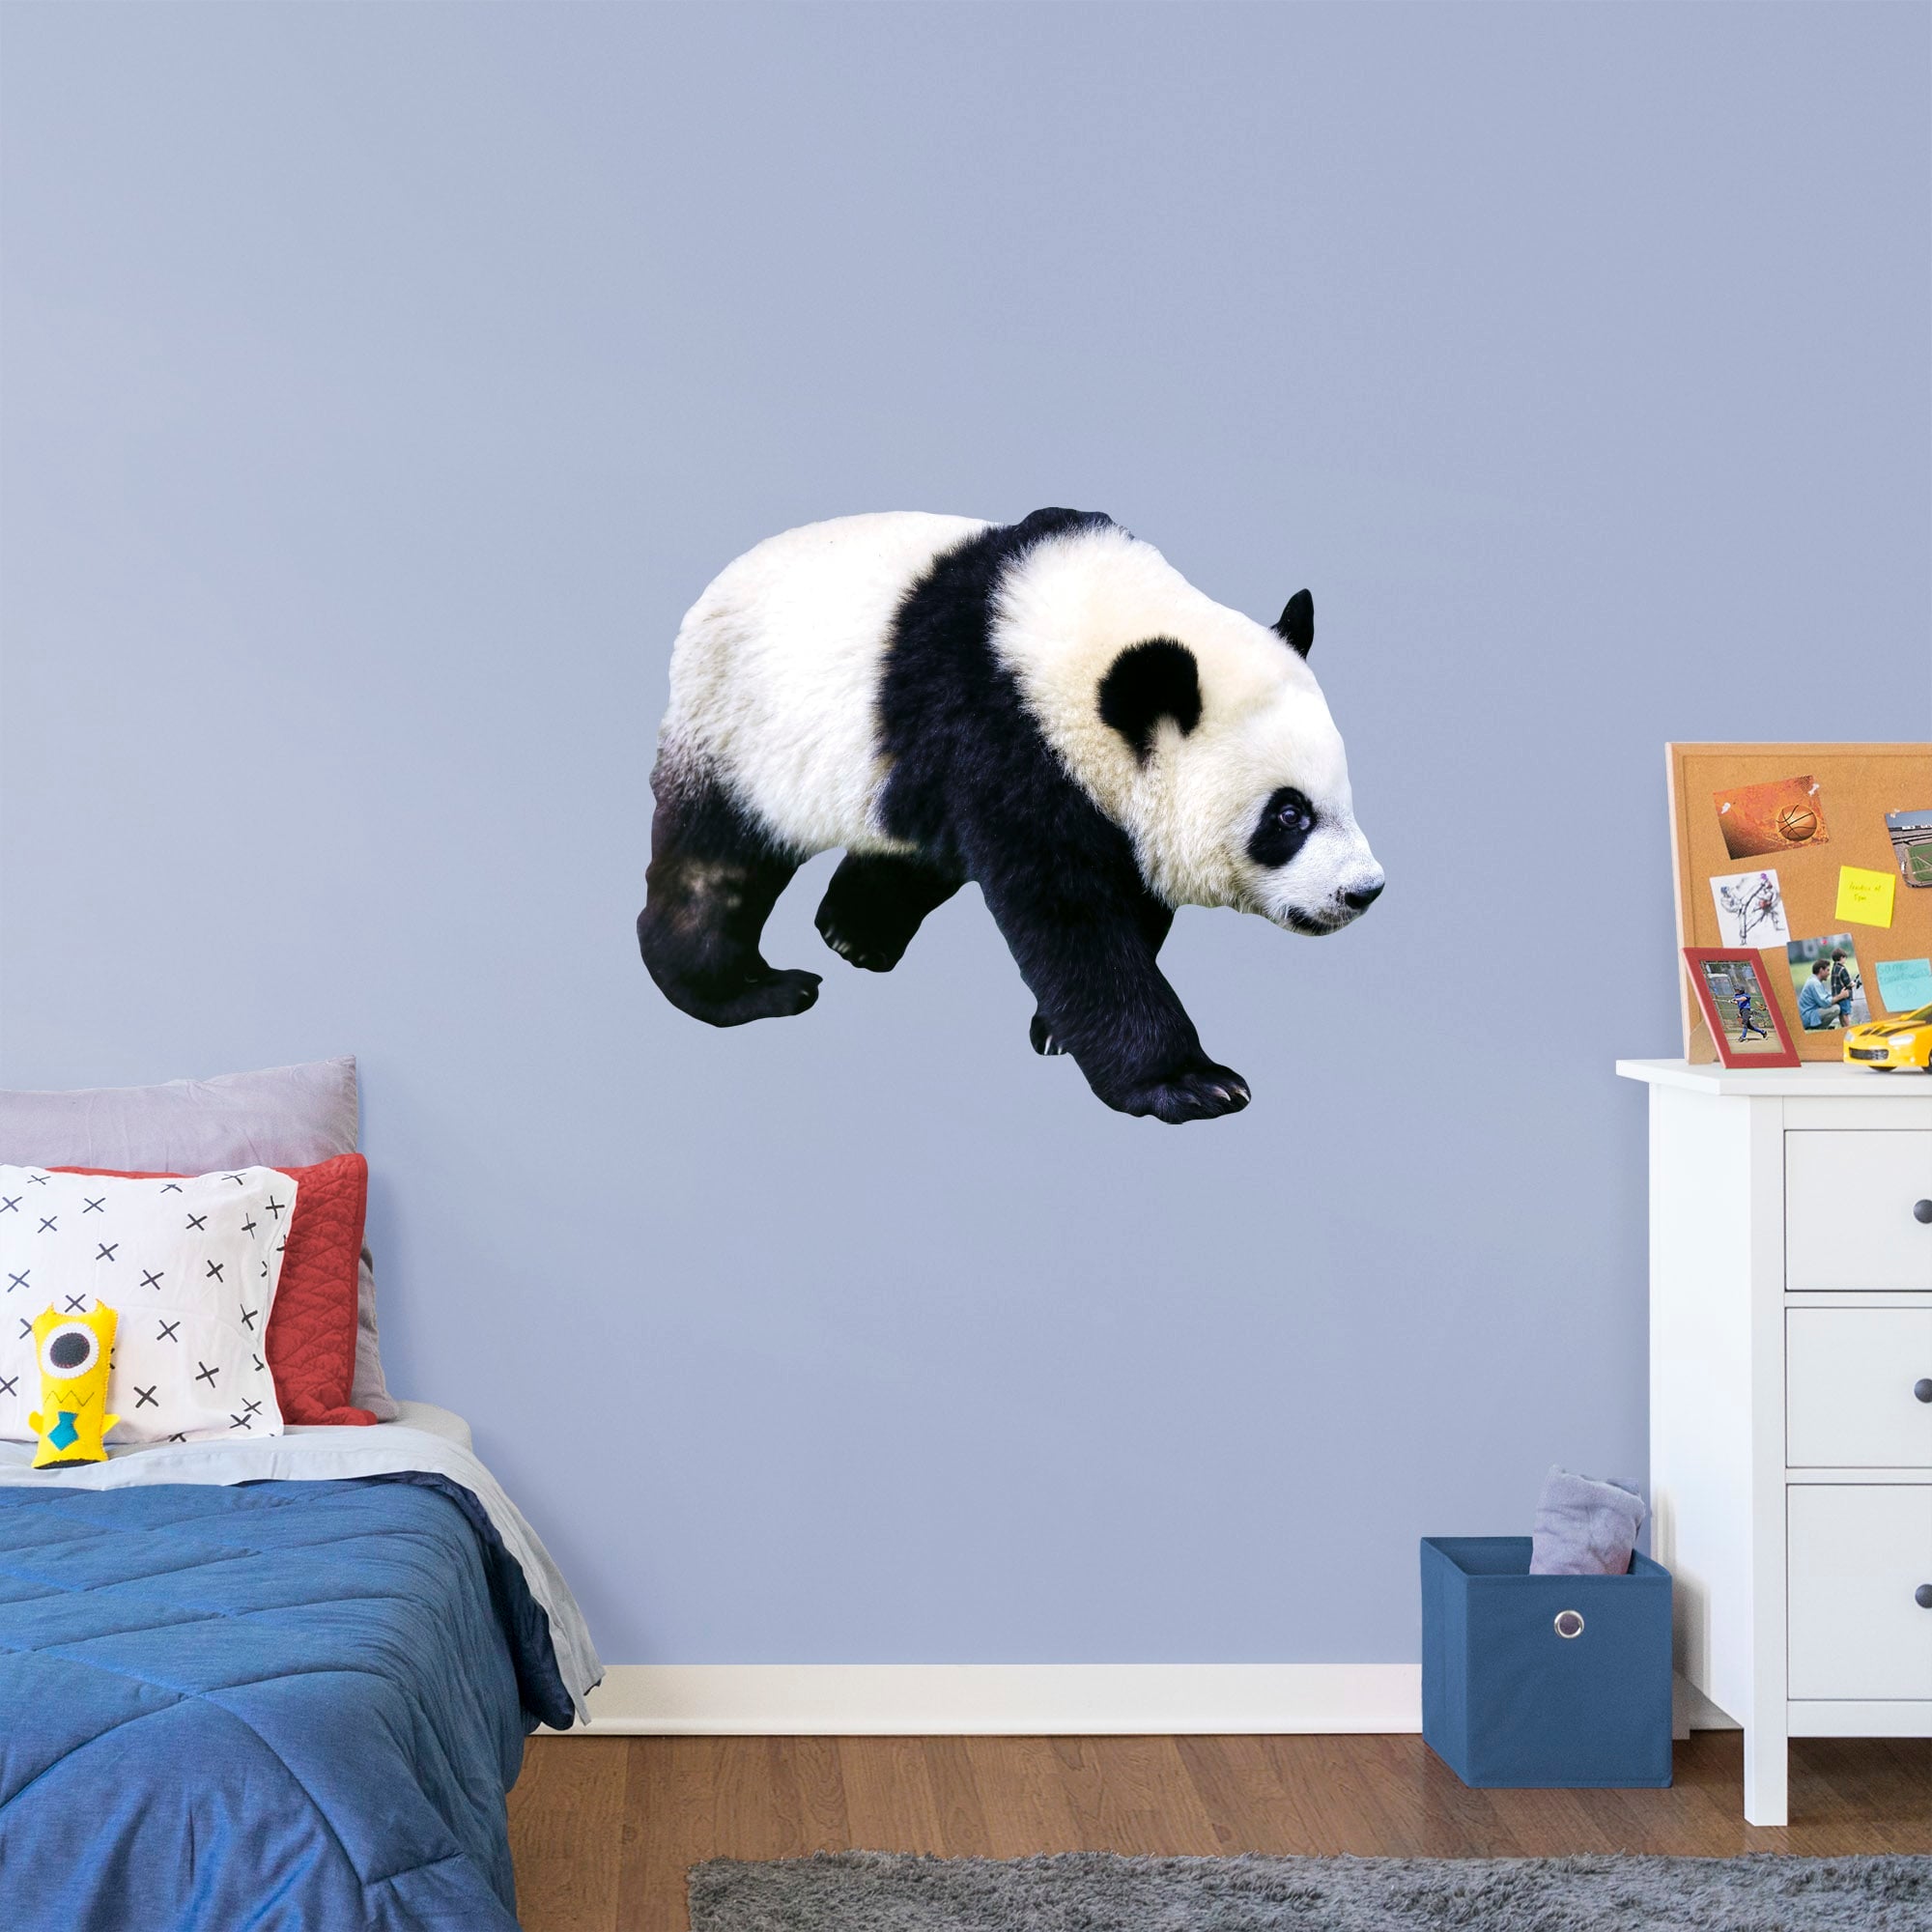 Panda - Removable Vinyl Decal Giant Animal + 2 Decals (47"W x 39"H) by Fathead